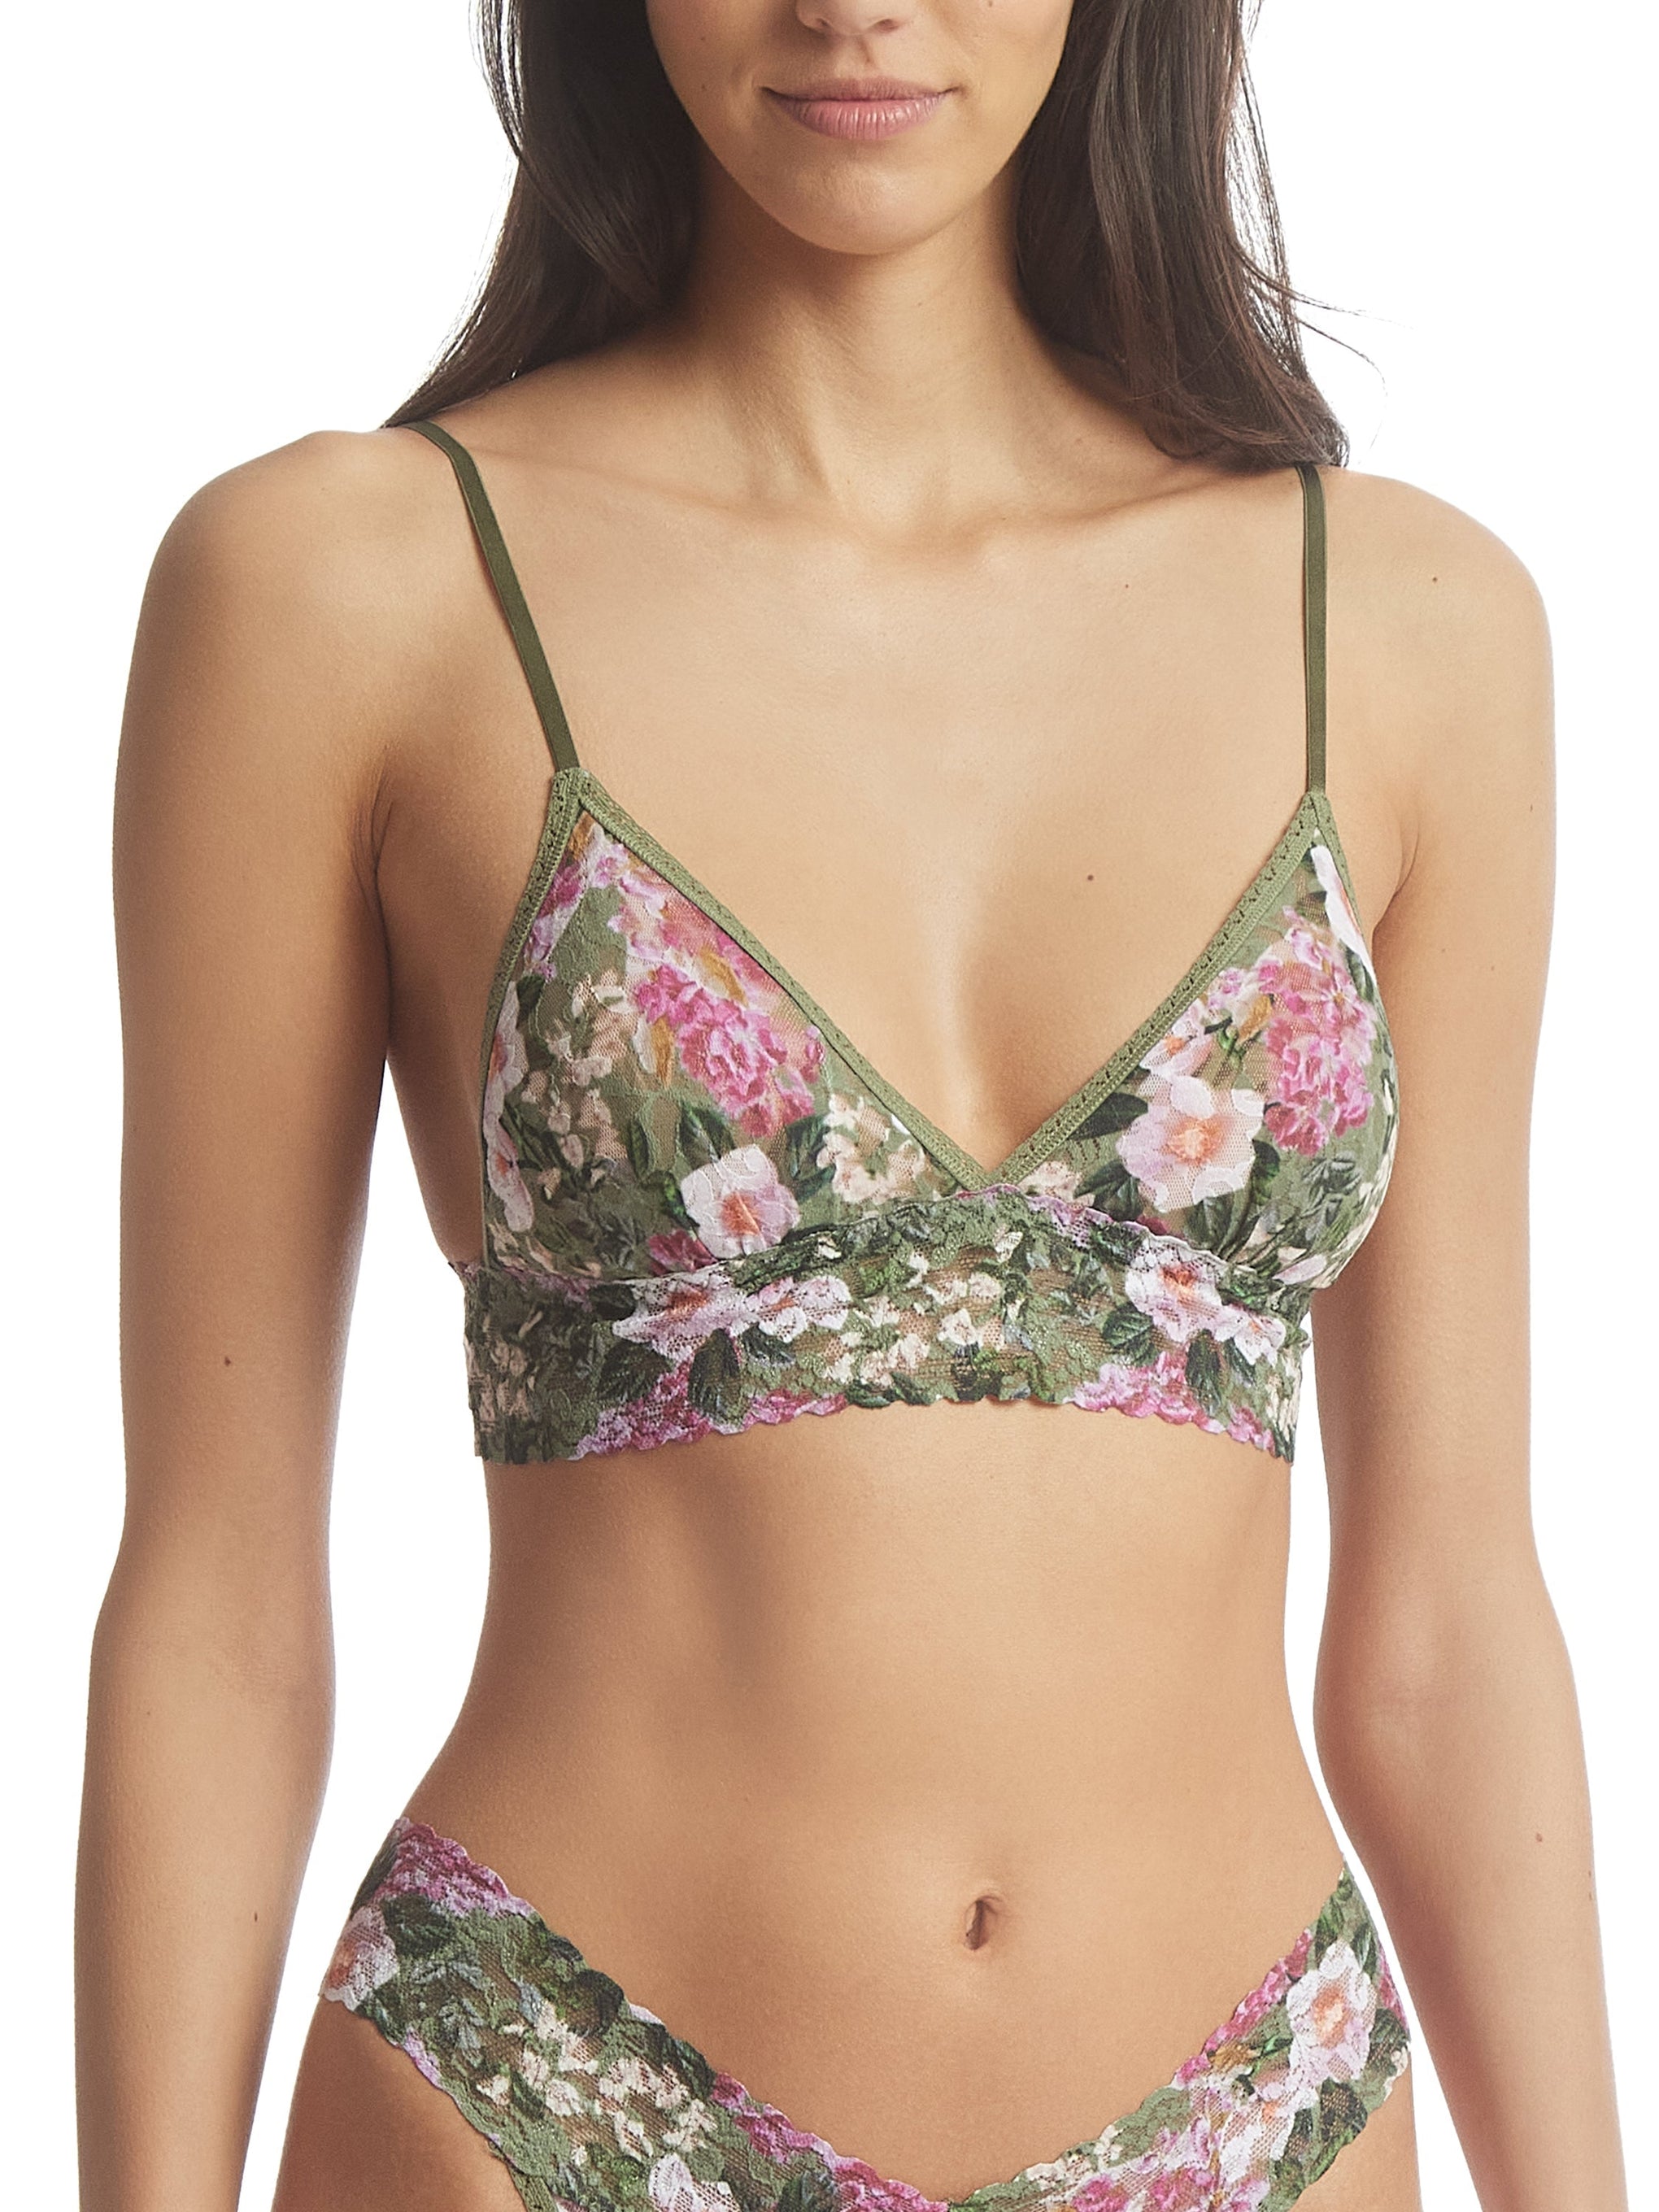 Lucky Brand Green Lace Floral Bra 42D Size undefined - $19 - From Jacqueline